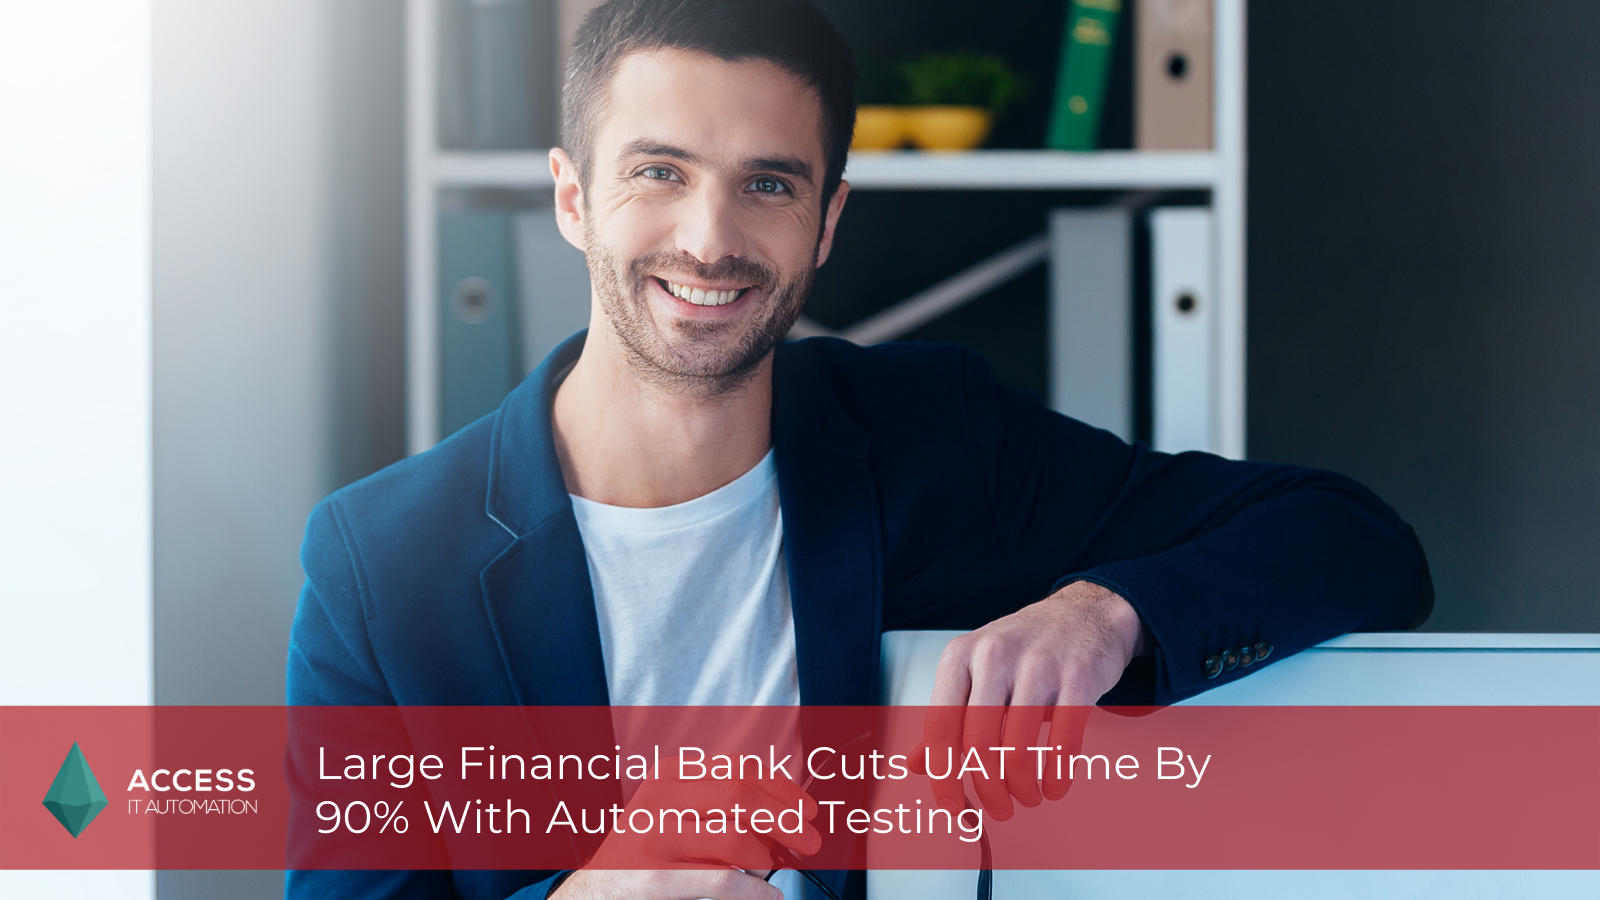 Large Financial Bank Cuts UAT Time By 90% With Automated Testing